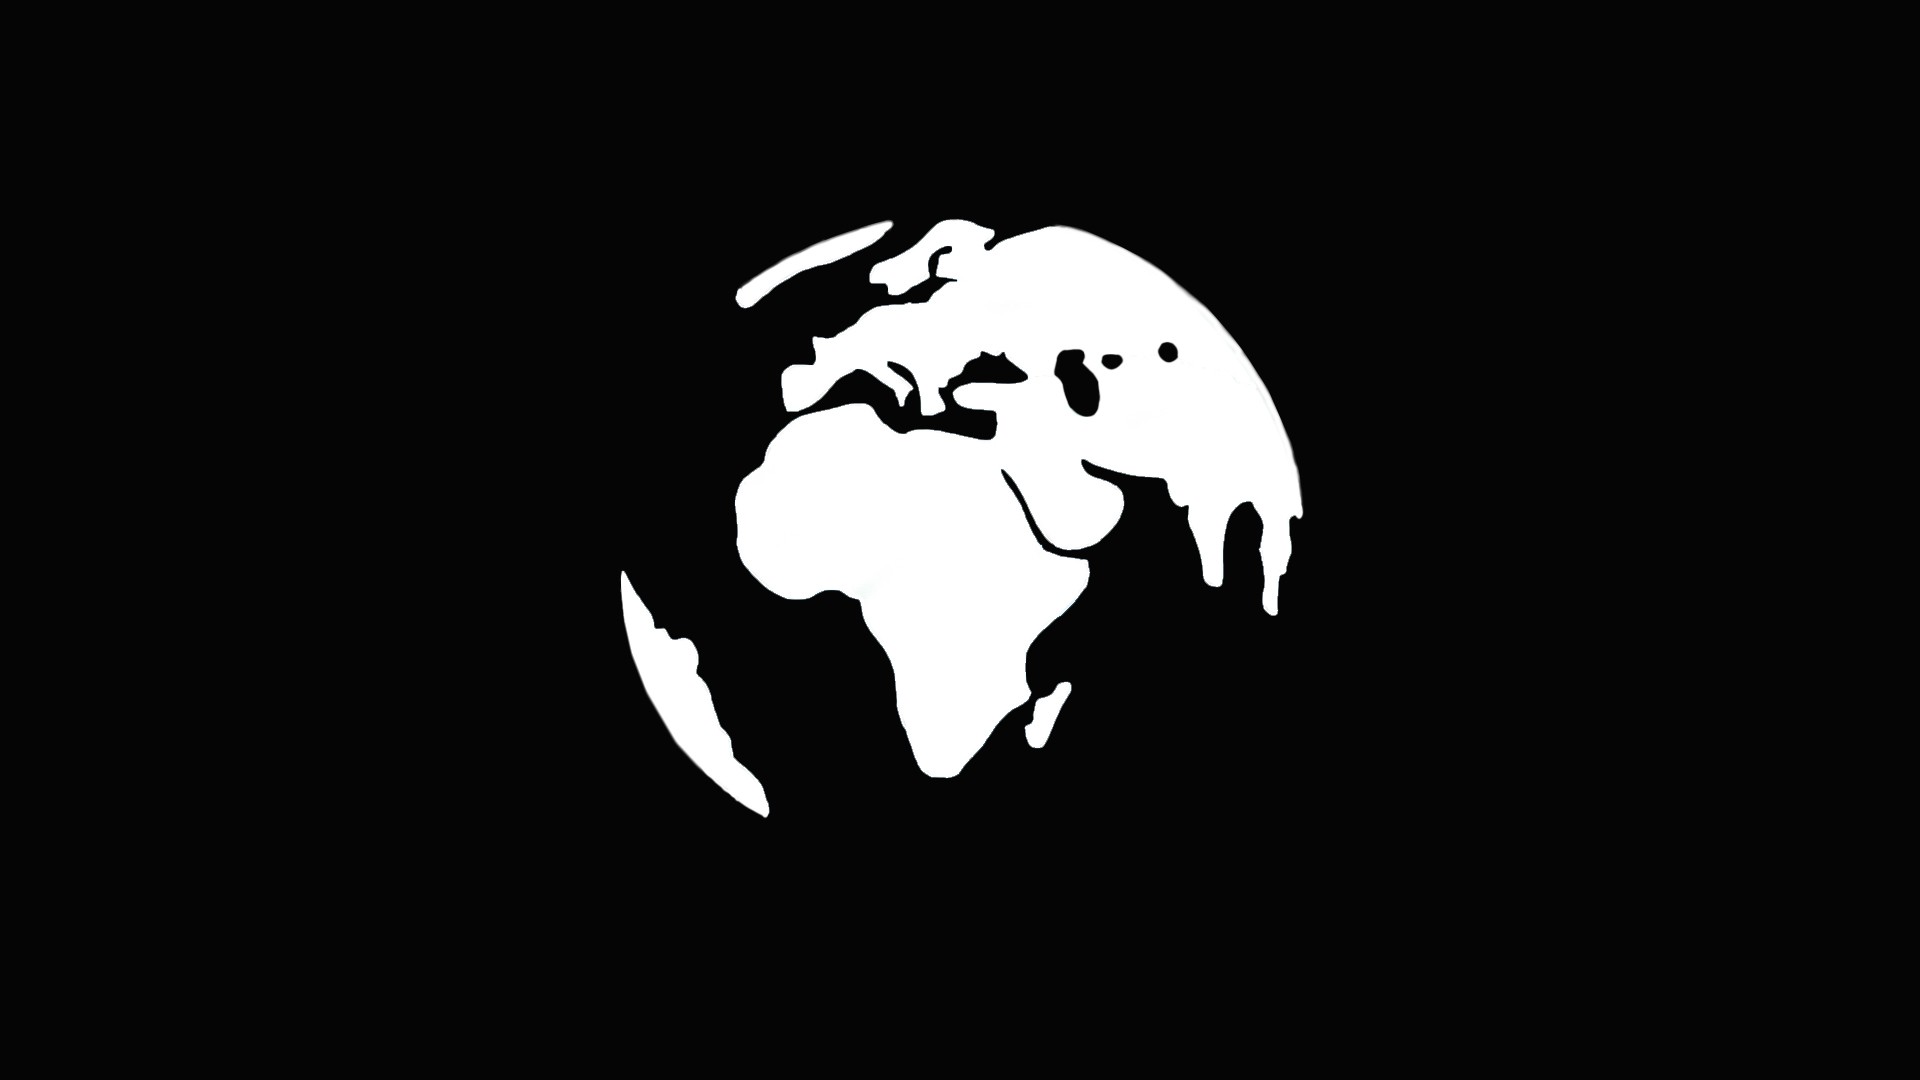 General 1920x1080 world minimalism black white continents Africa Europe globes Earth black background Asia South America map